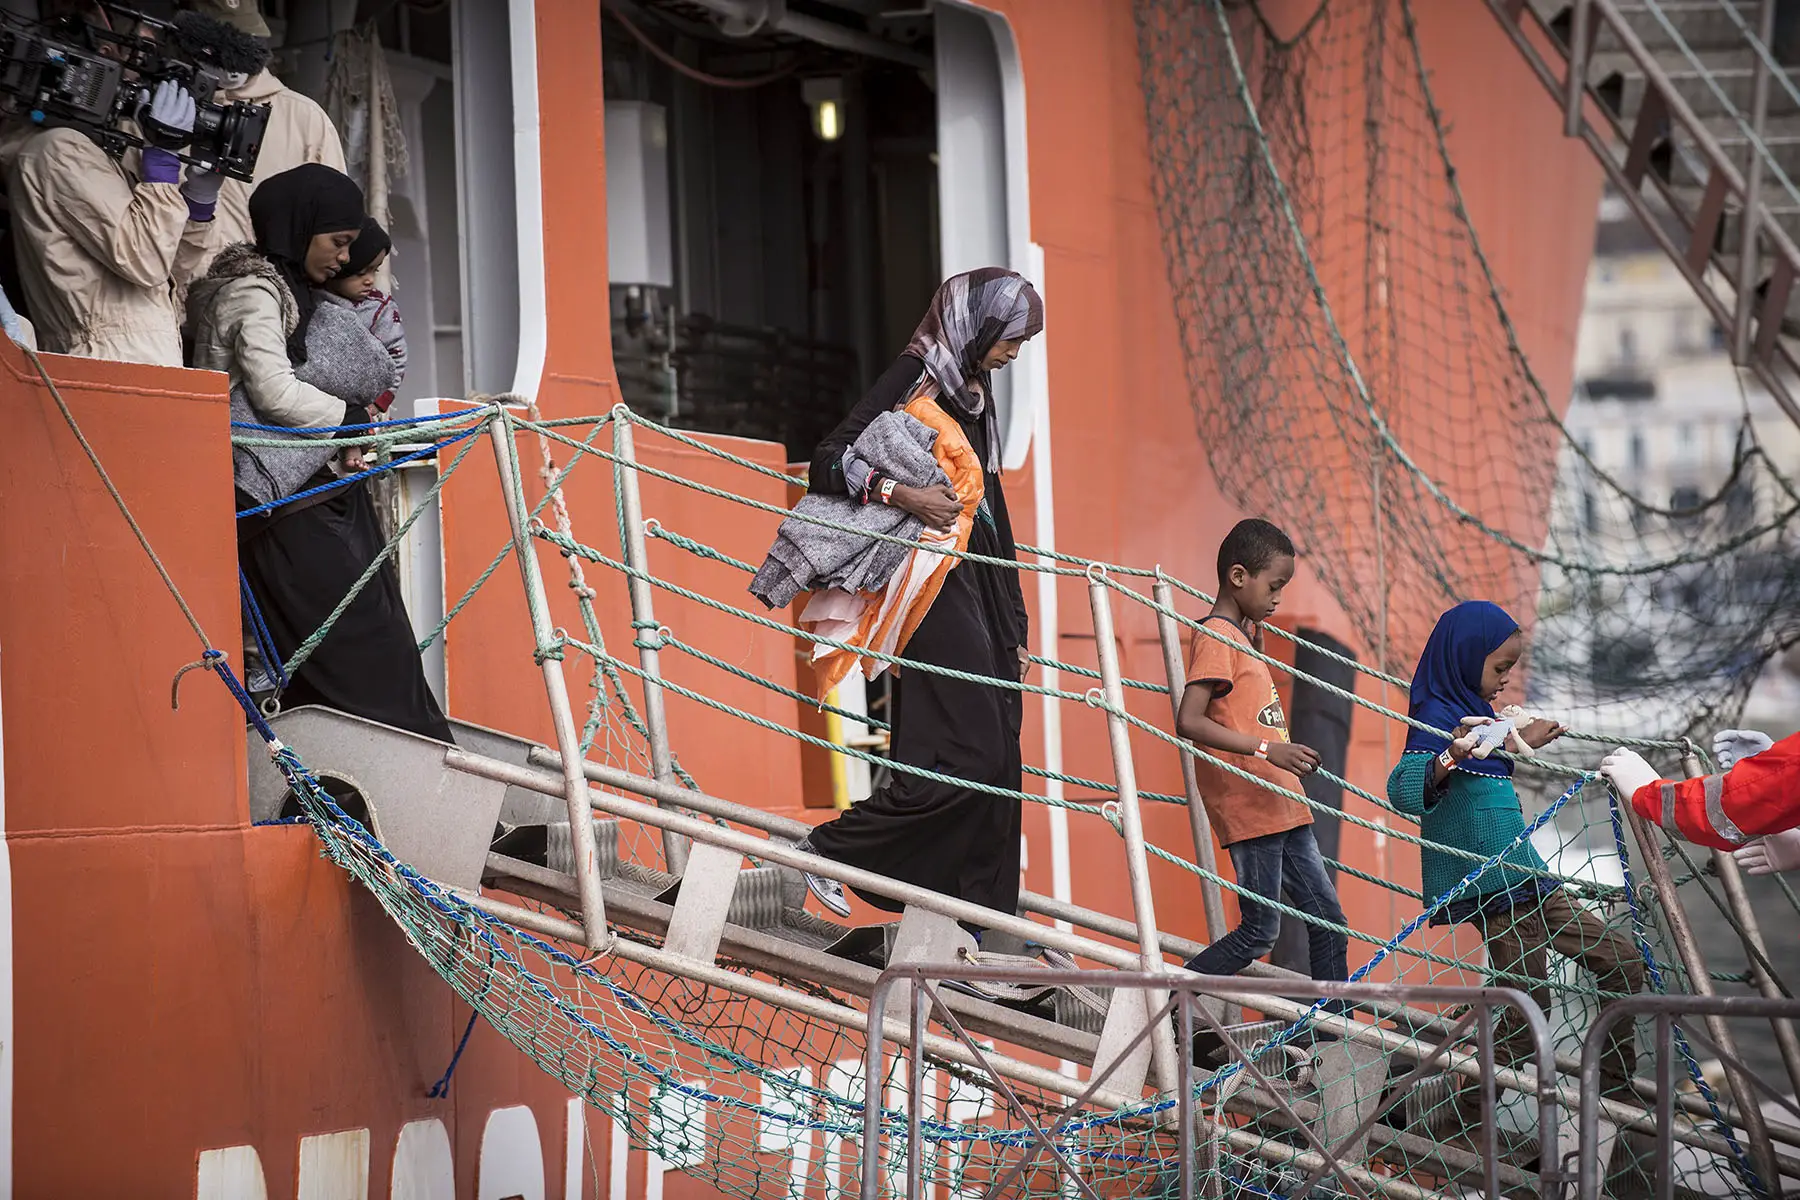 About 600 refugees, among which women and children, arrive at the port of Salerno, transported by the Norwegian naval vessel 